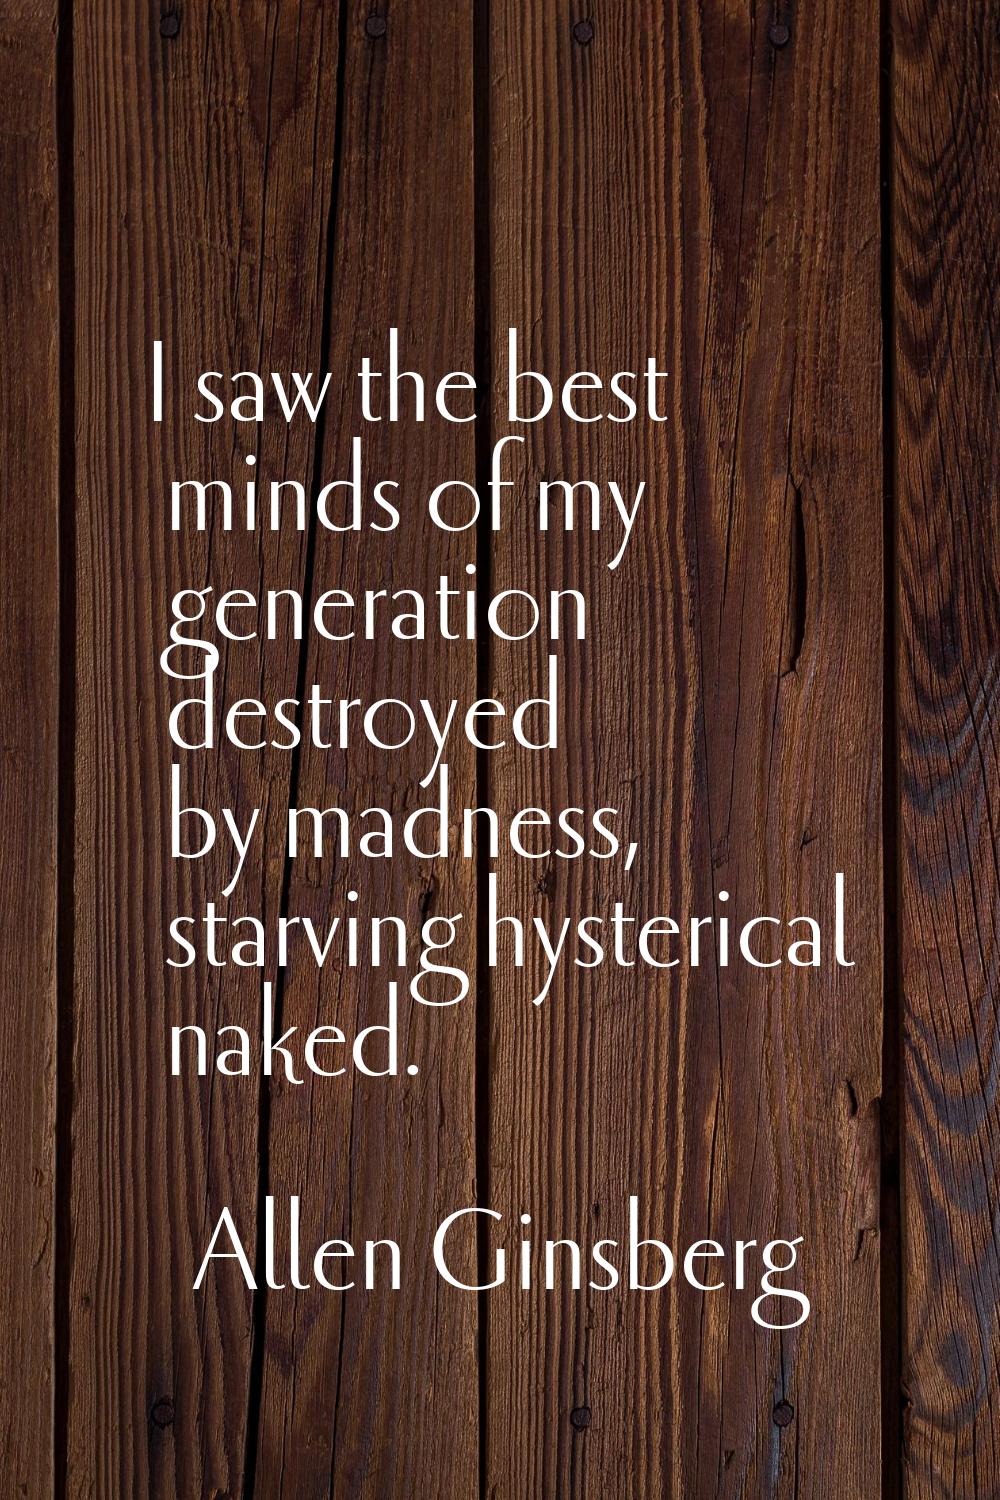 I saw the best minds of my generation destroyed by madness, starving hysterical naked.